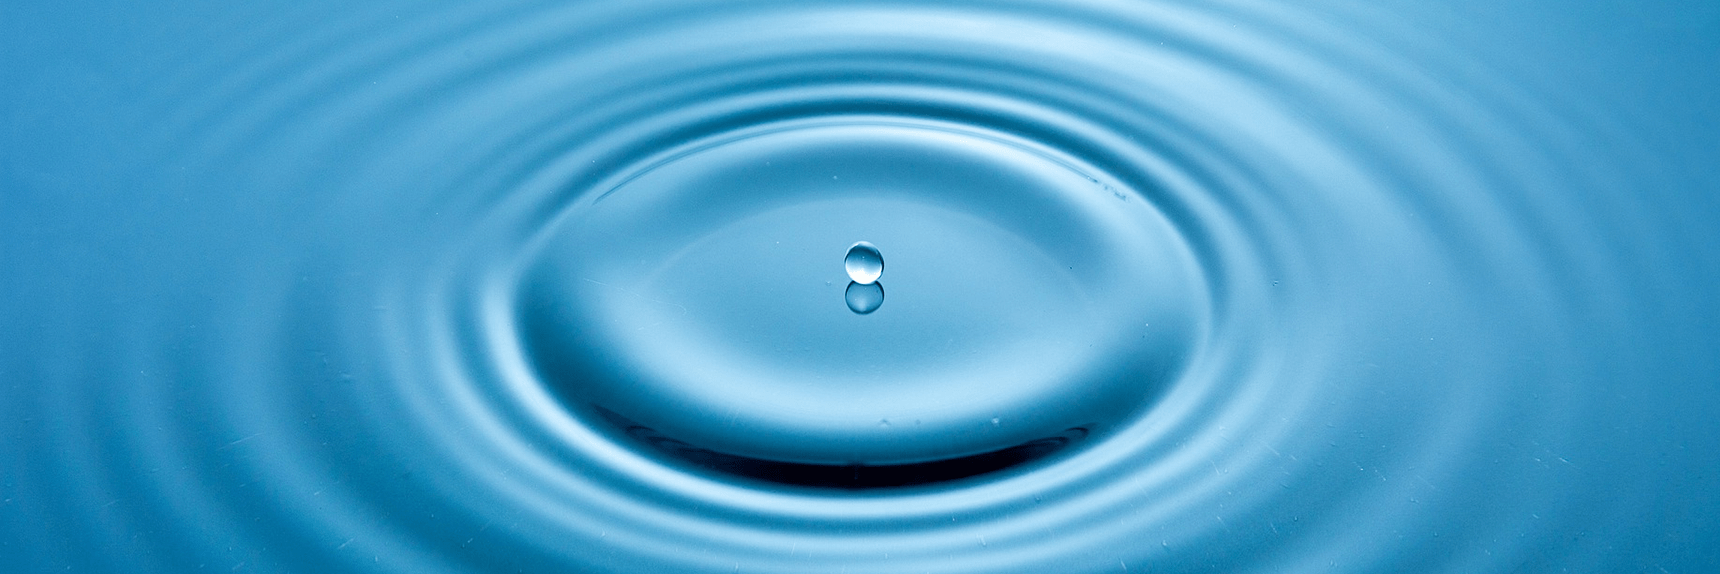 Droplet of water ripples the surface